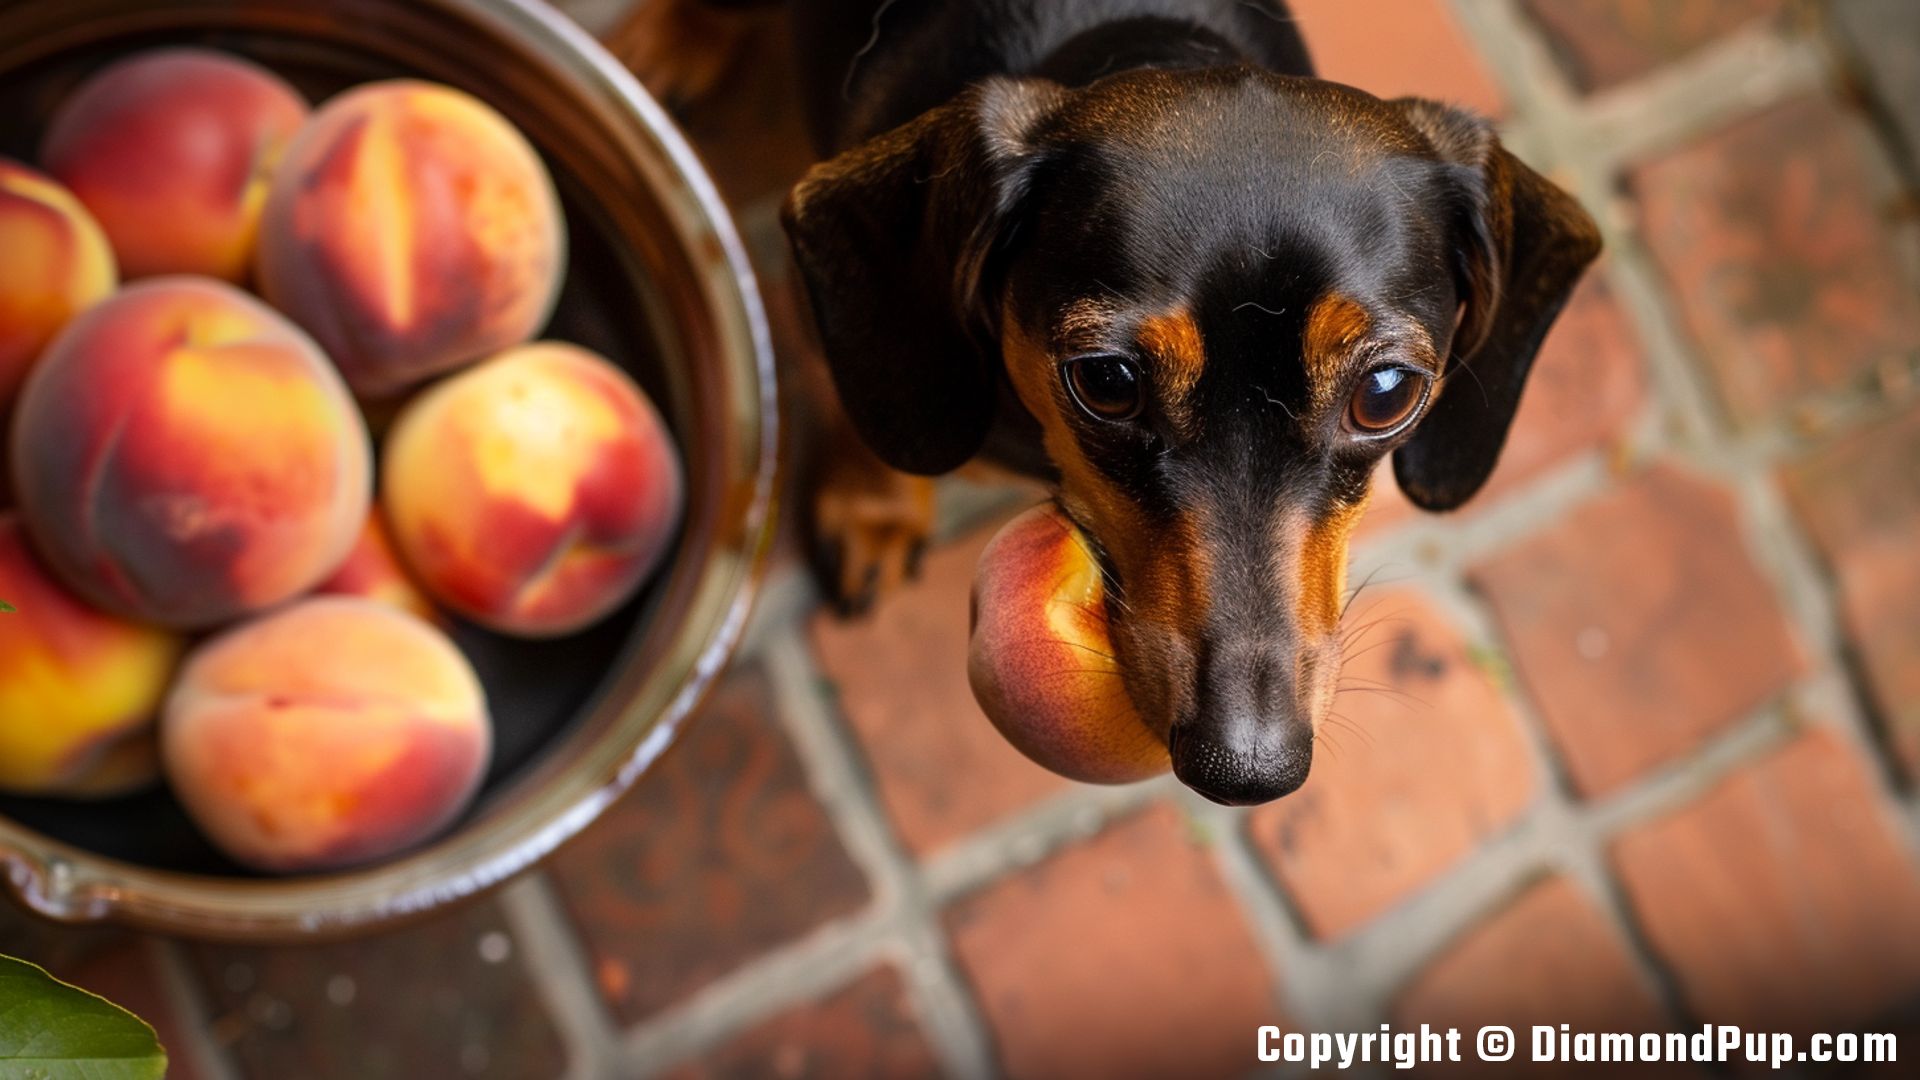 Image of a Cute Dachshund Snacking on Peaches